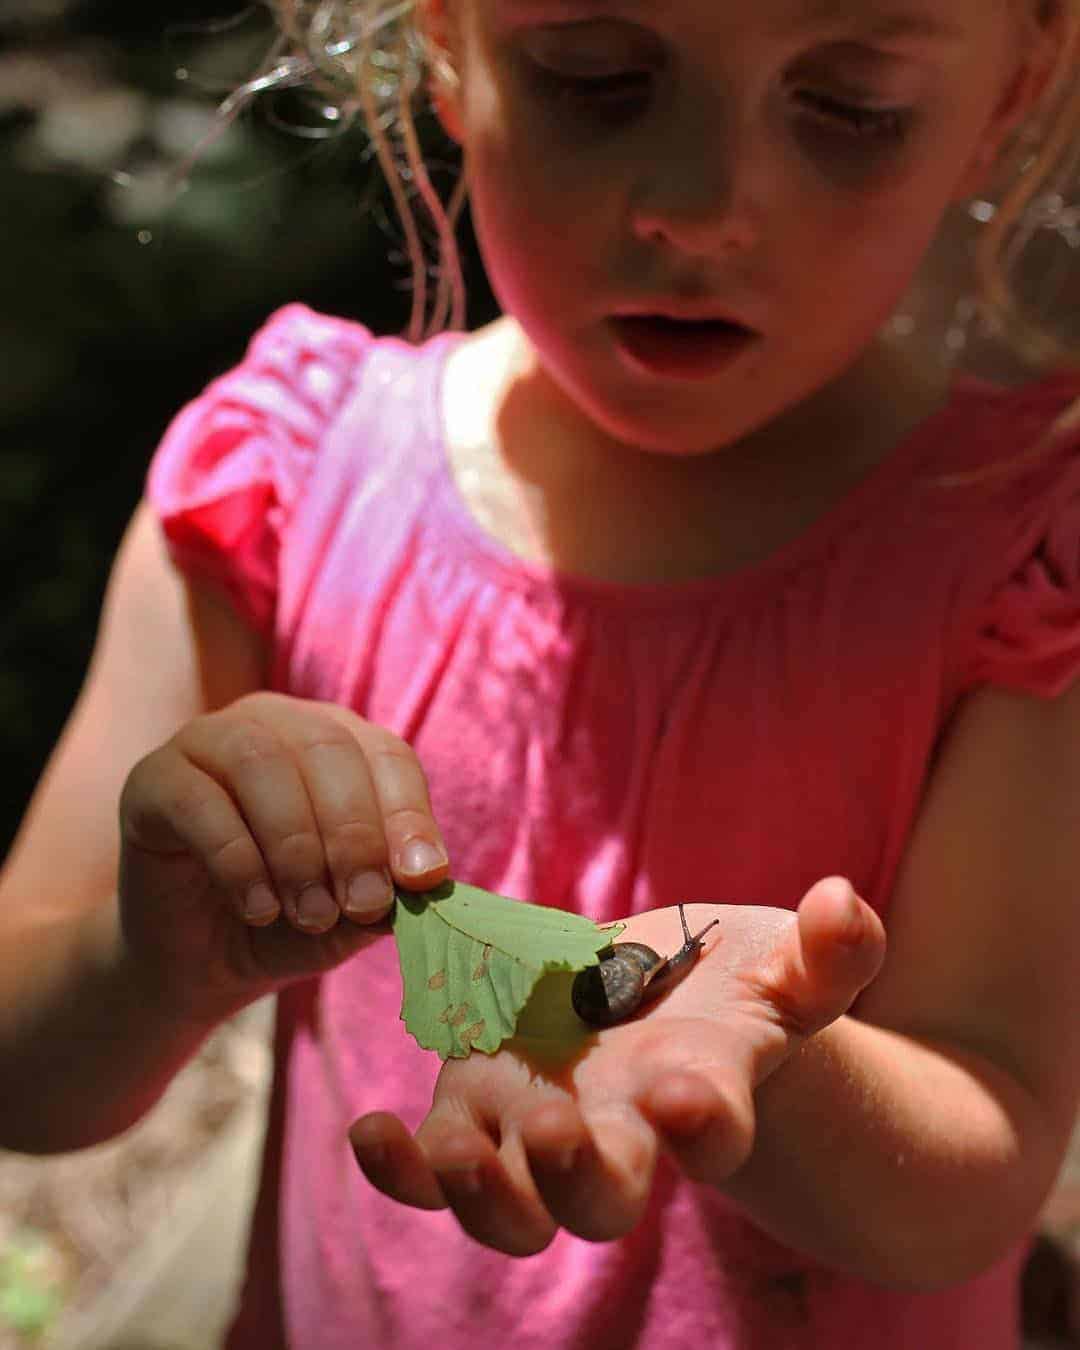 creative ways to help your child overcome a fear of bugs, insects and creepy-crawlies